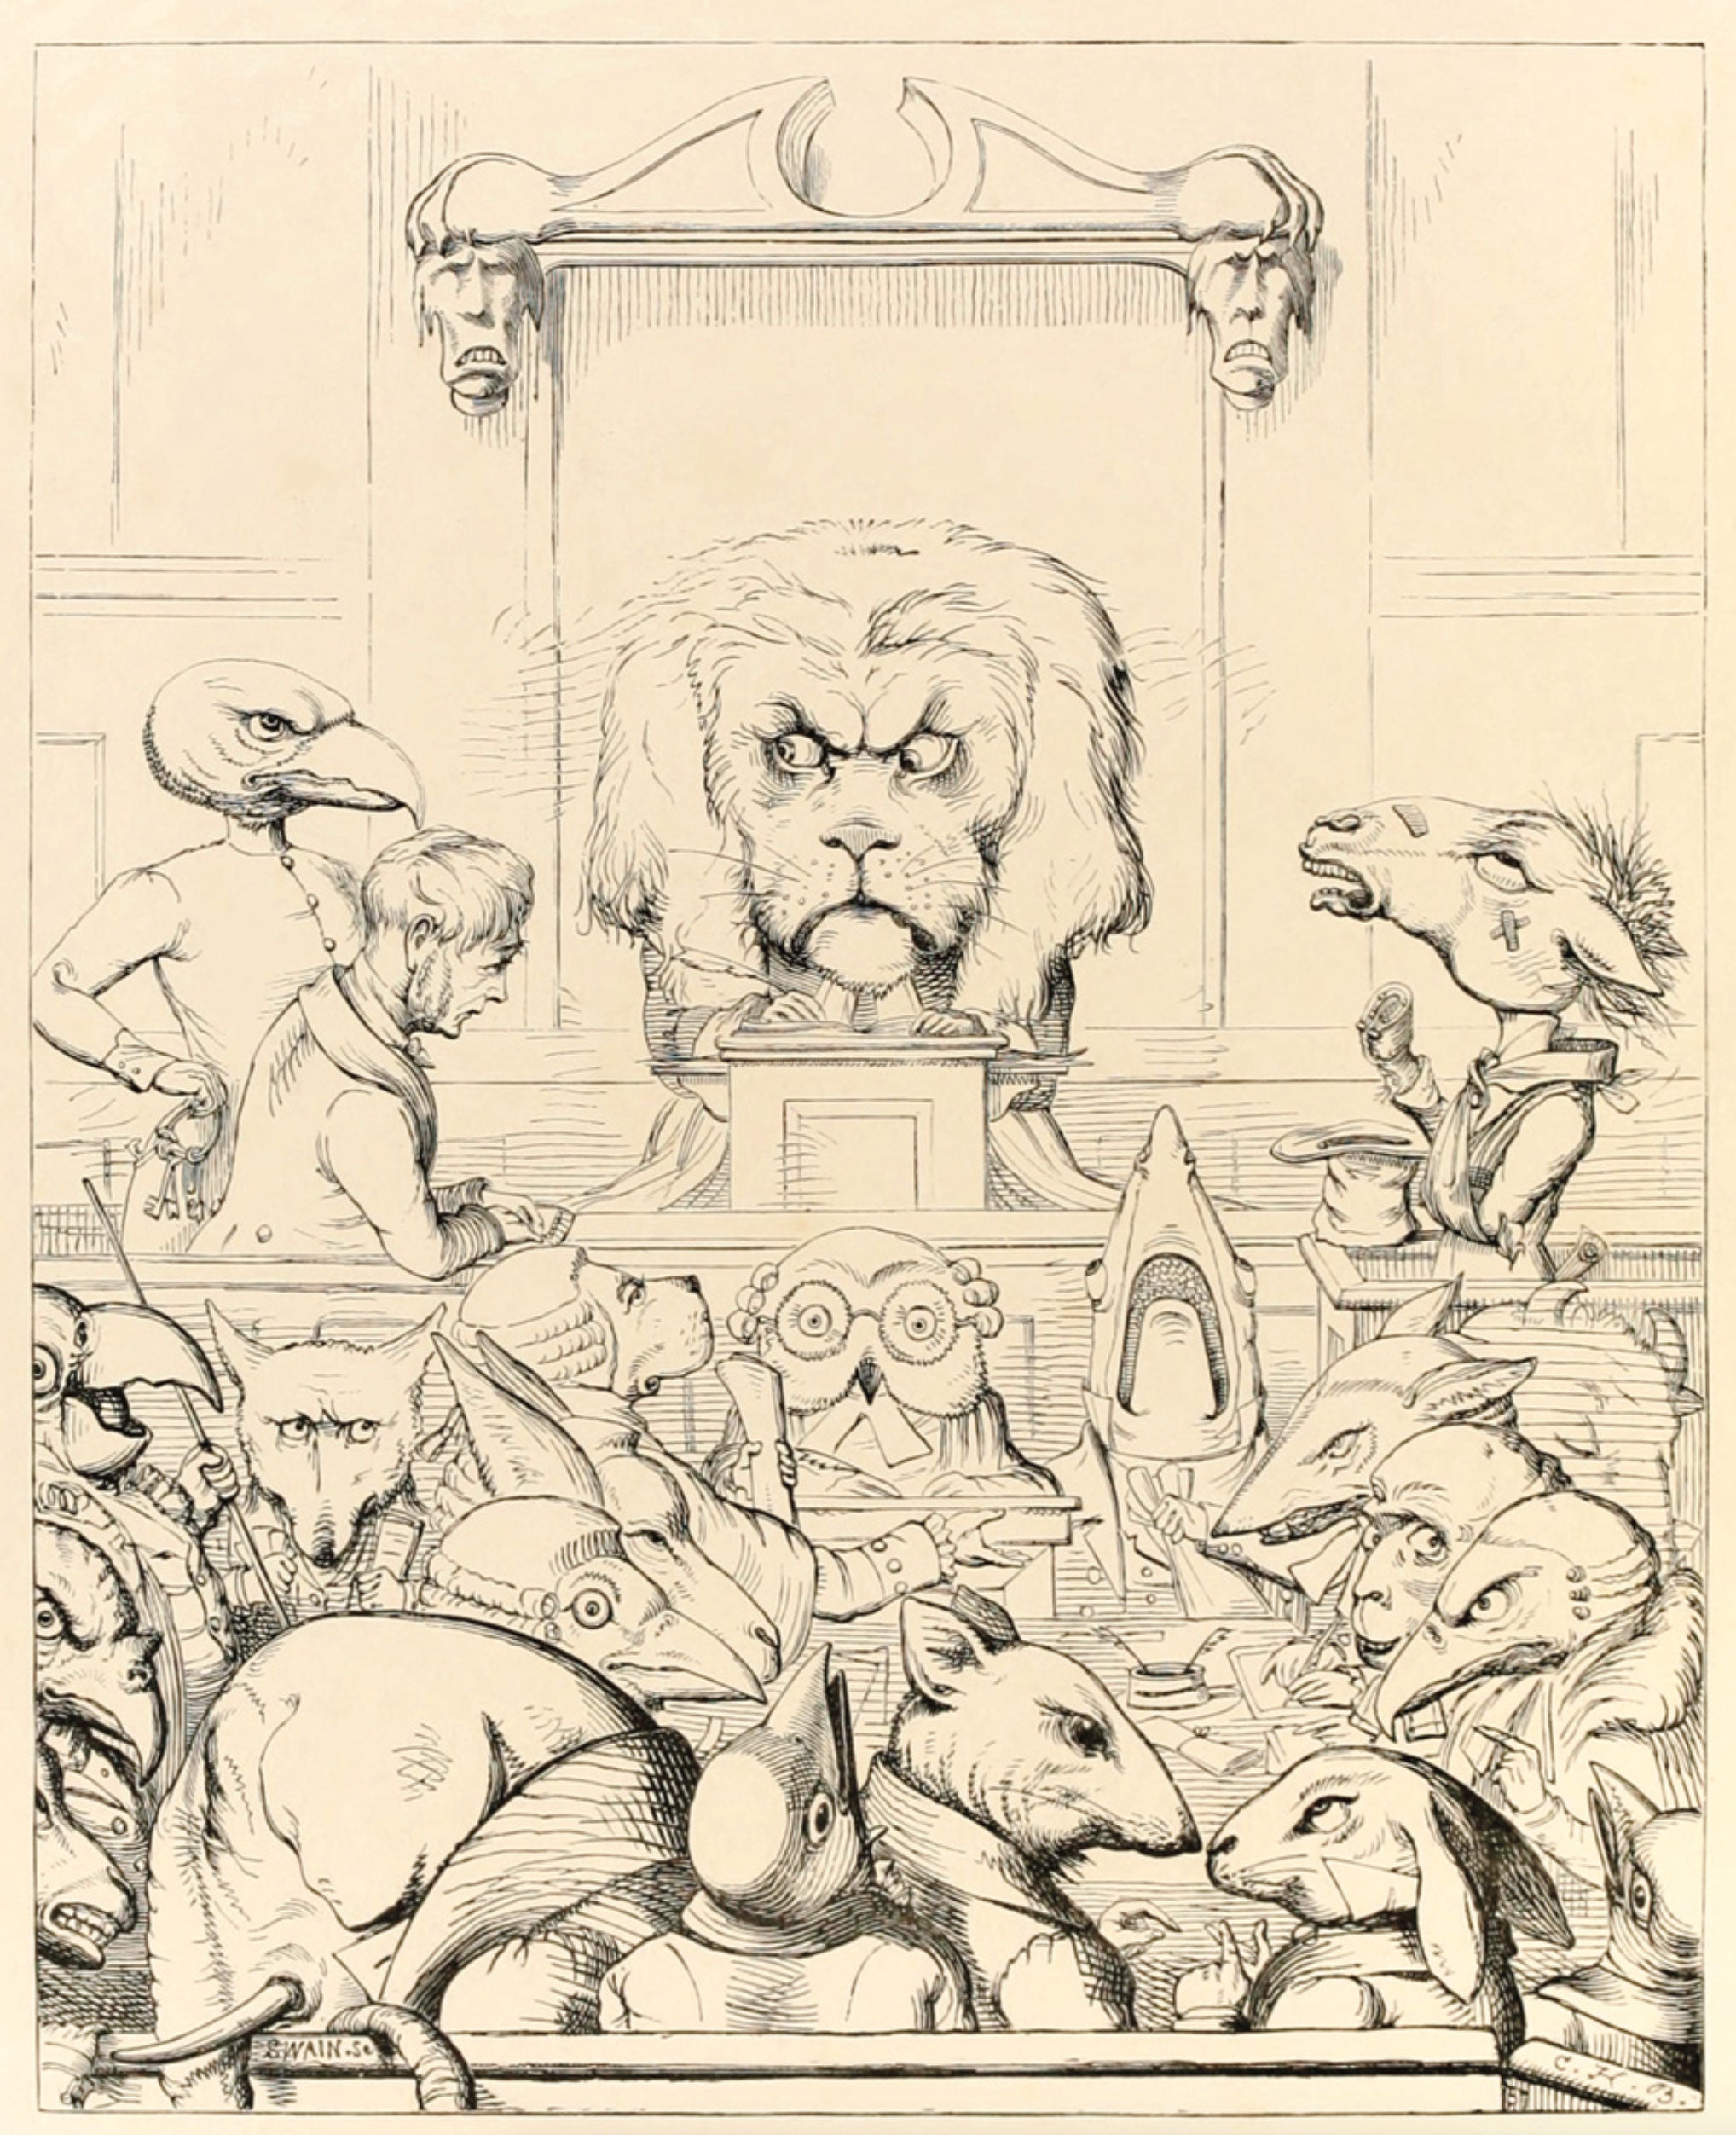 Charles Bennett, Court of the Lion from Aesop’s Fables, 1857; this engraving may have inspired Tenniel’s own court scene in Alice in Wonderland